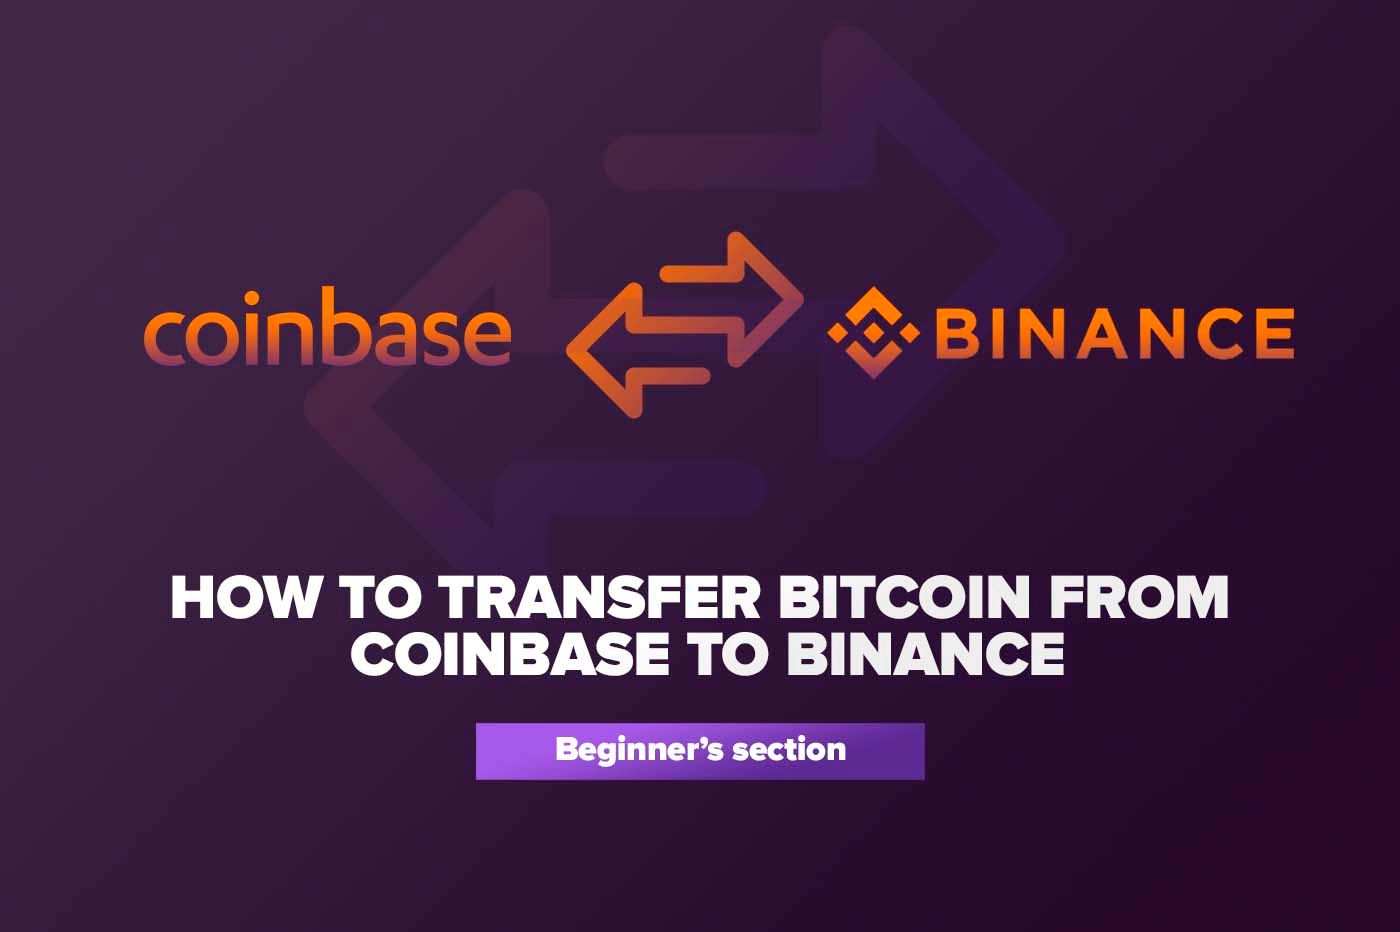 Article How To Transfer Bitcoin From Coinbase To Binance